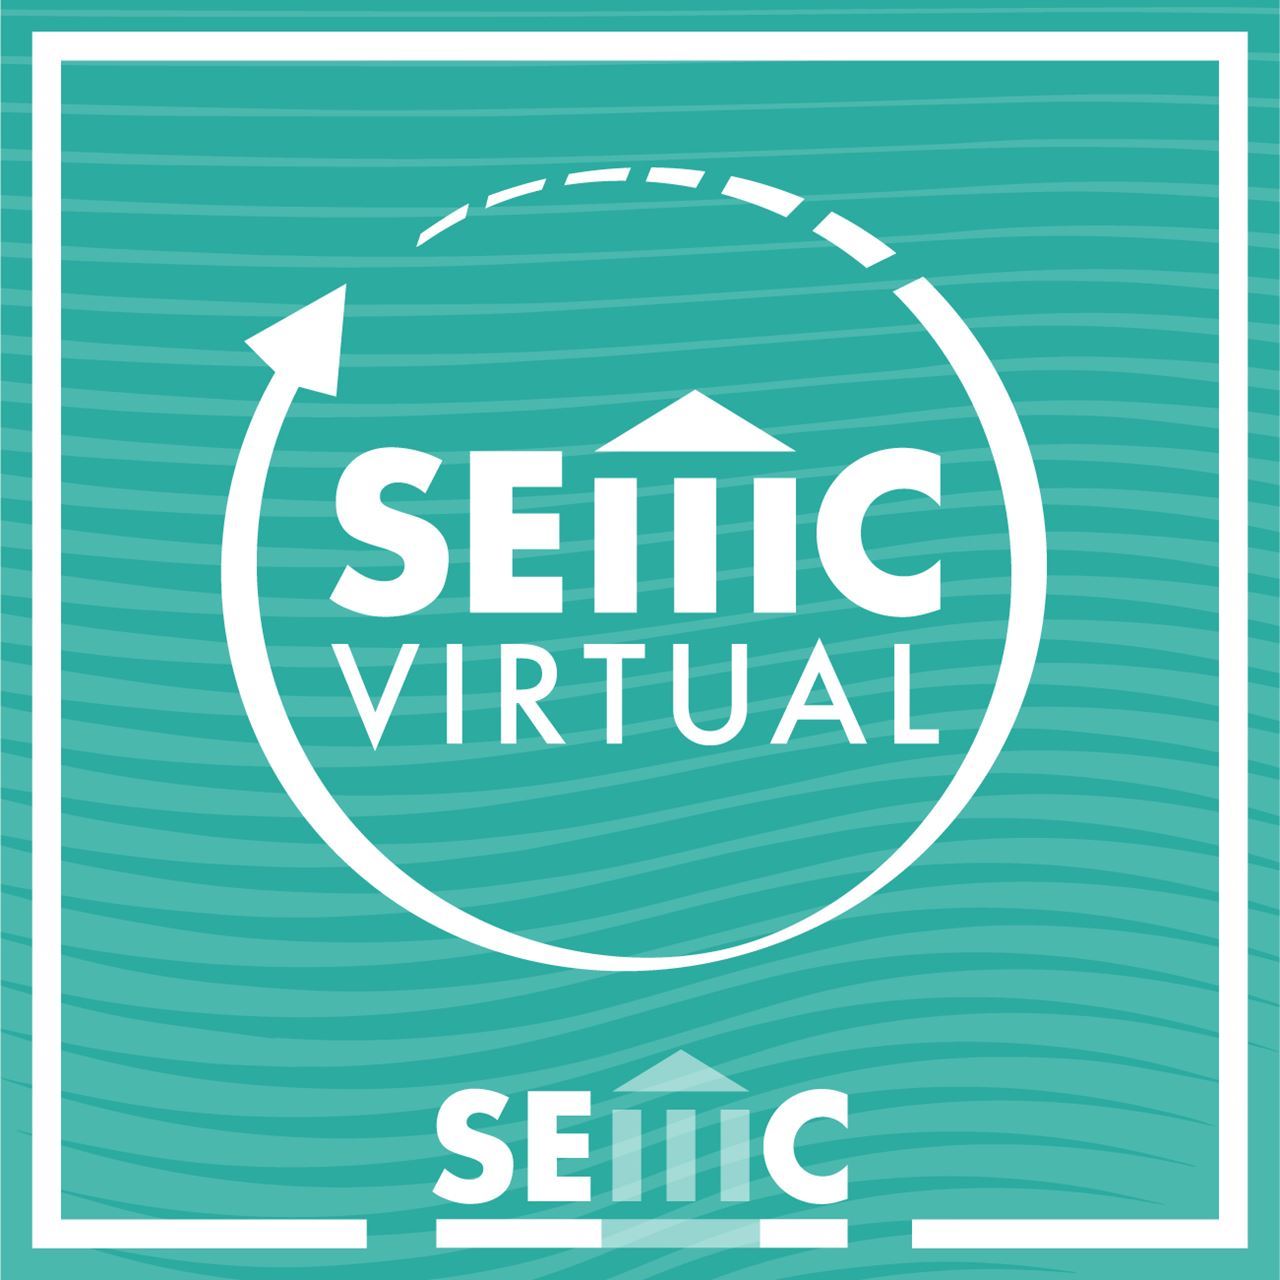 Blue/green graphic with the SEMC Virtual symbol which is a circular arrow indicating this is a virtual progmram offering. The SEMC logo is a the bottom of the graphic.